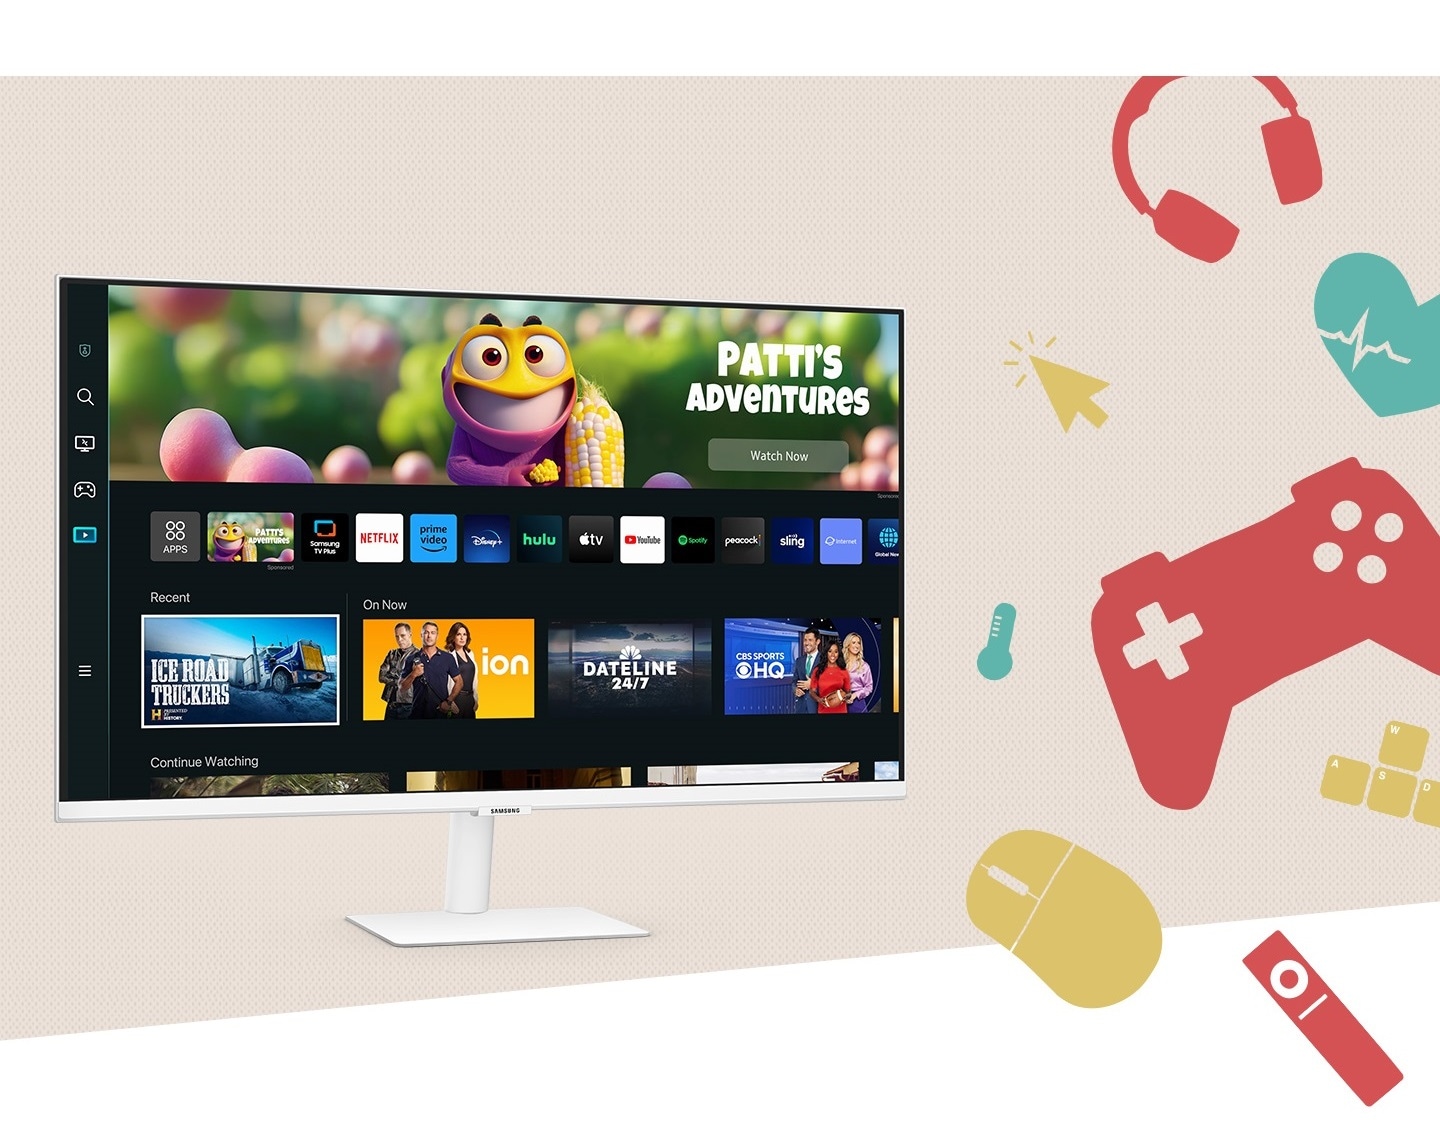 There is a Smart Monitor M5. And at the right side of it, there are several colorful icons which demonstrate various features of the monitor.